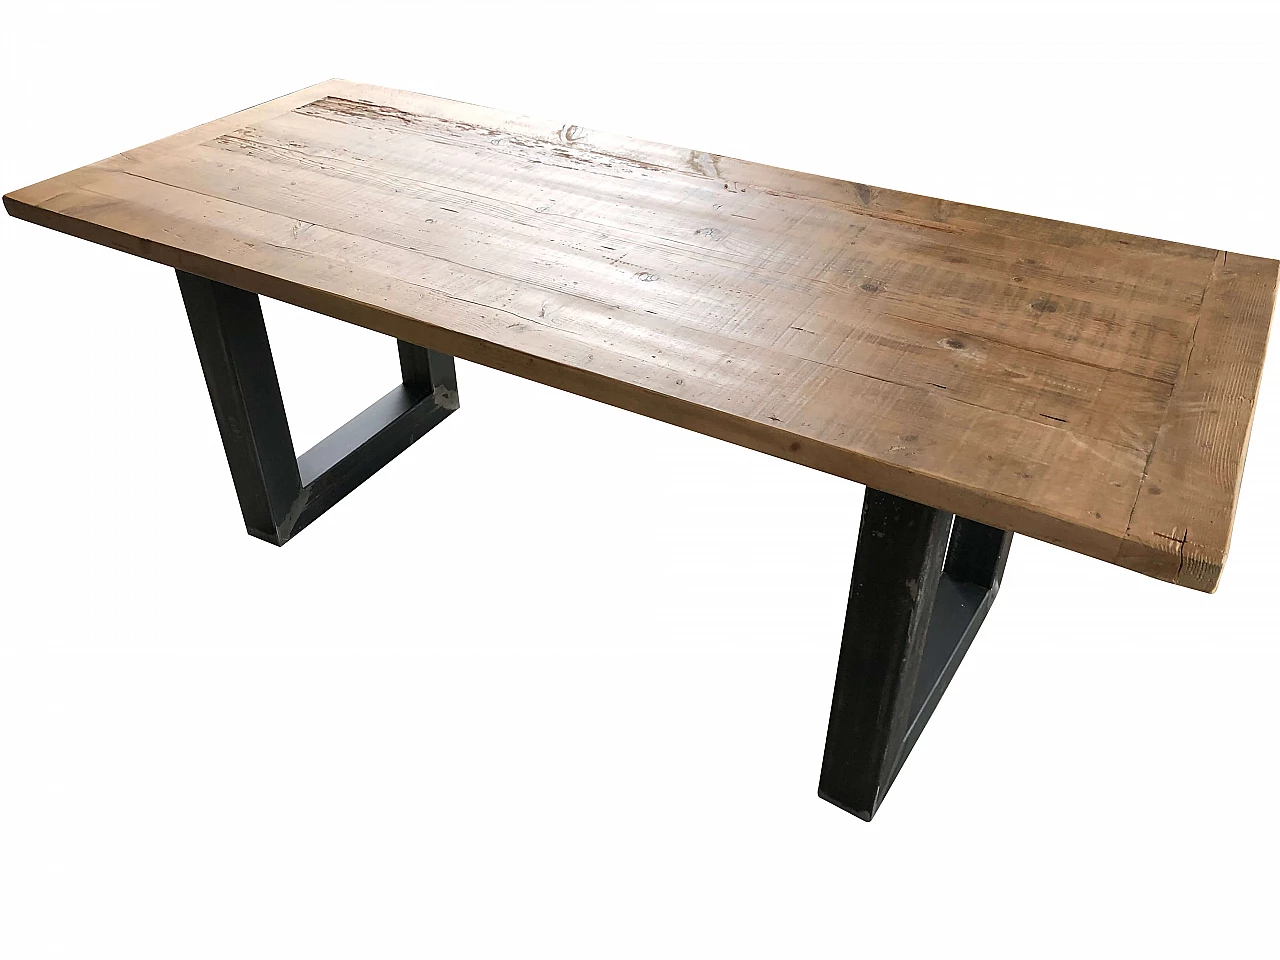 Table with salvaged wood and iron legs 1095870